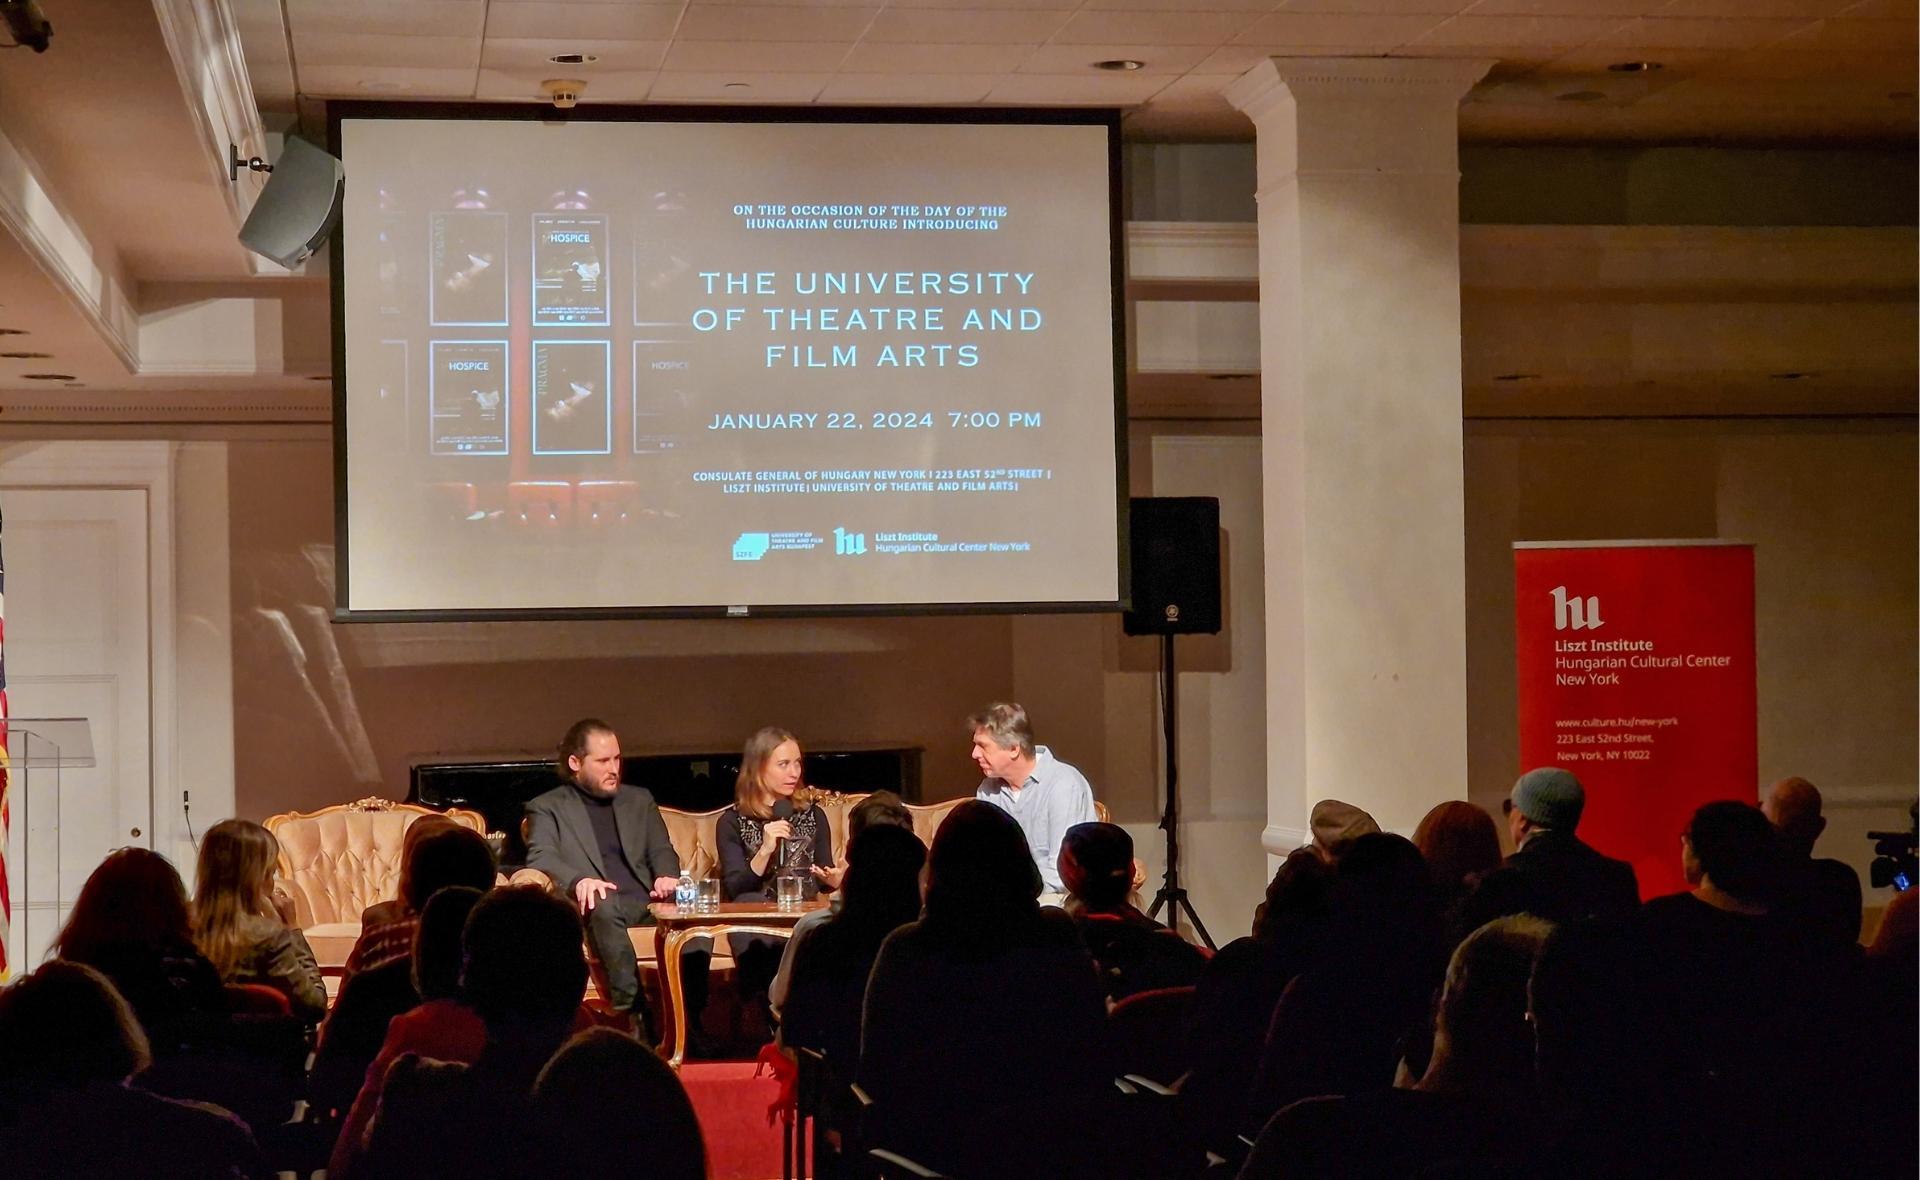 The University of Theater and Film Arts made its debut in New York